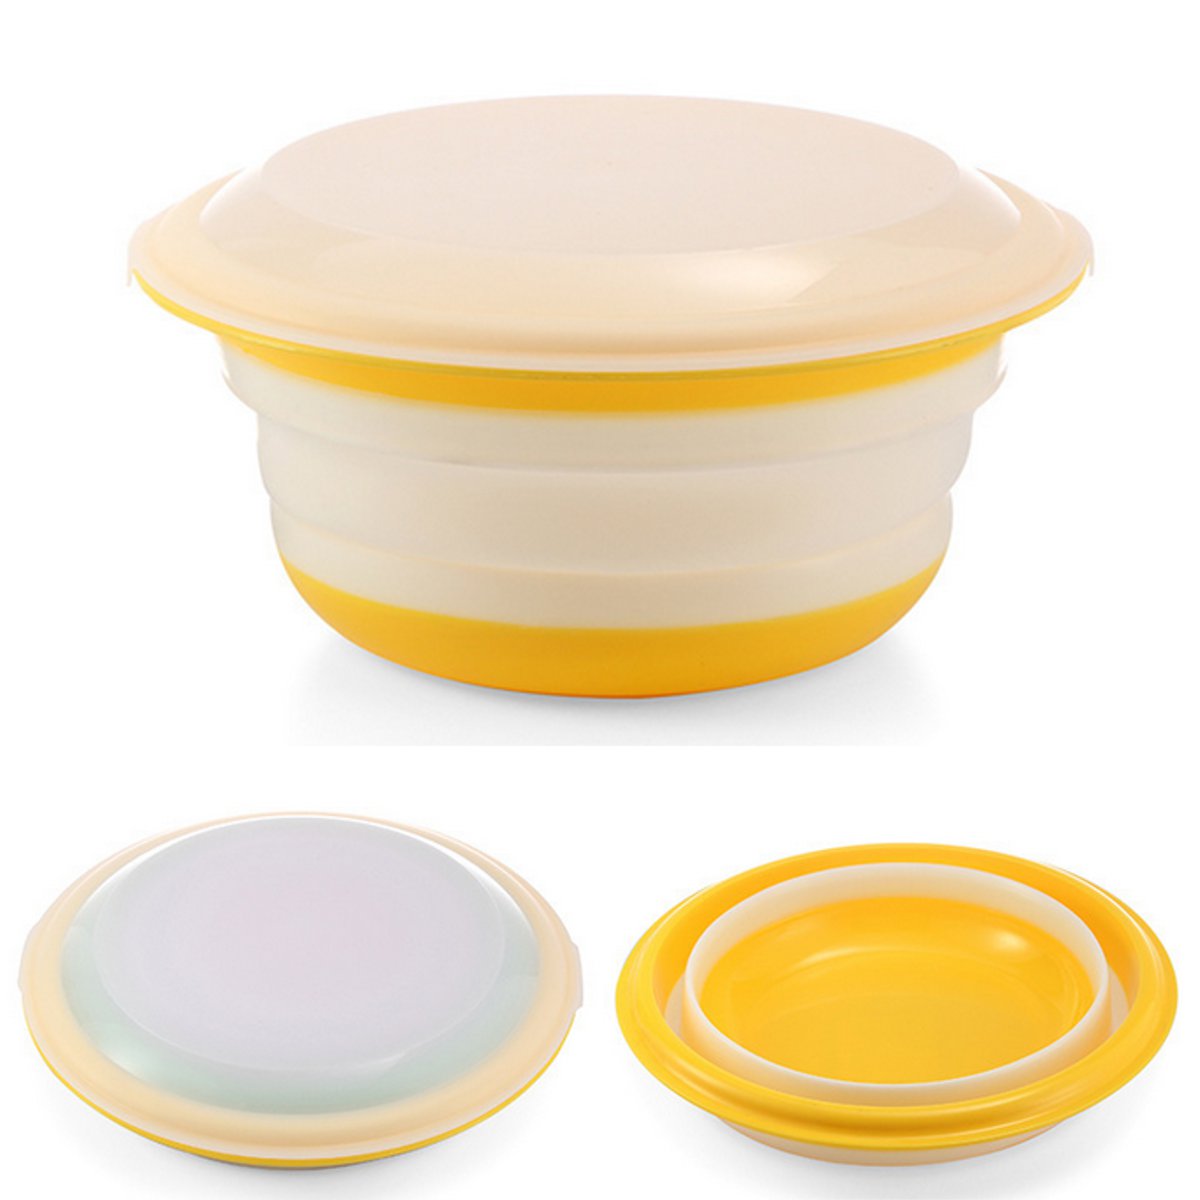 Collapsible Bowls with Lids, Foldable Meal Prep Containers Reusable,  Silicone Food Storage Container…See more Collapsible Bowls with Lids,  Foldable